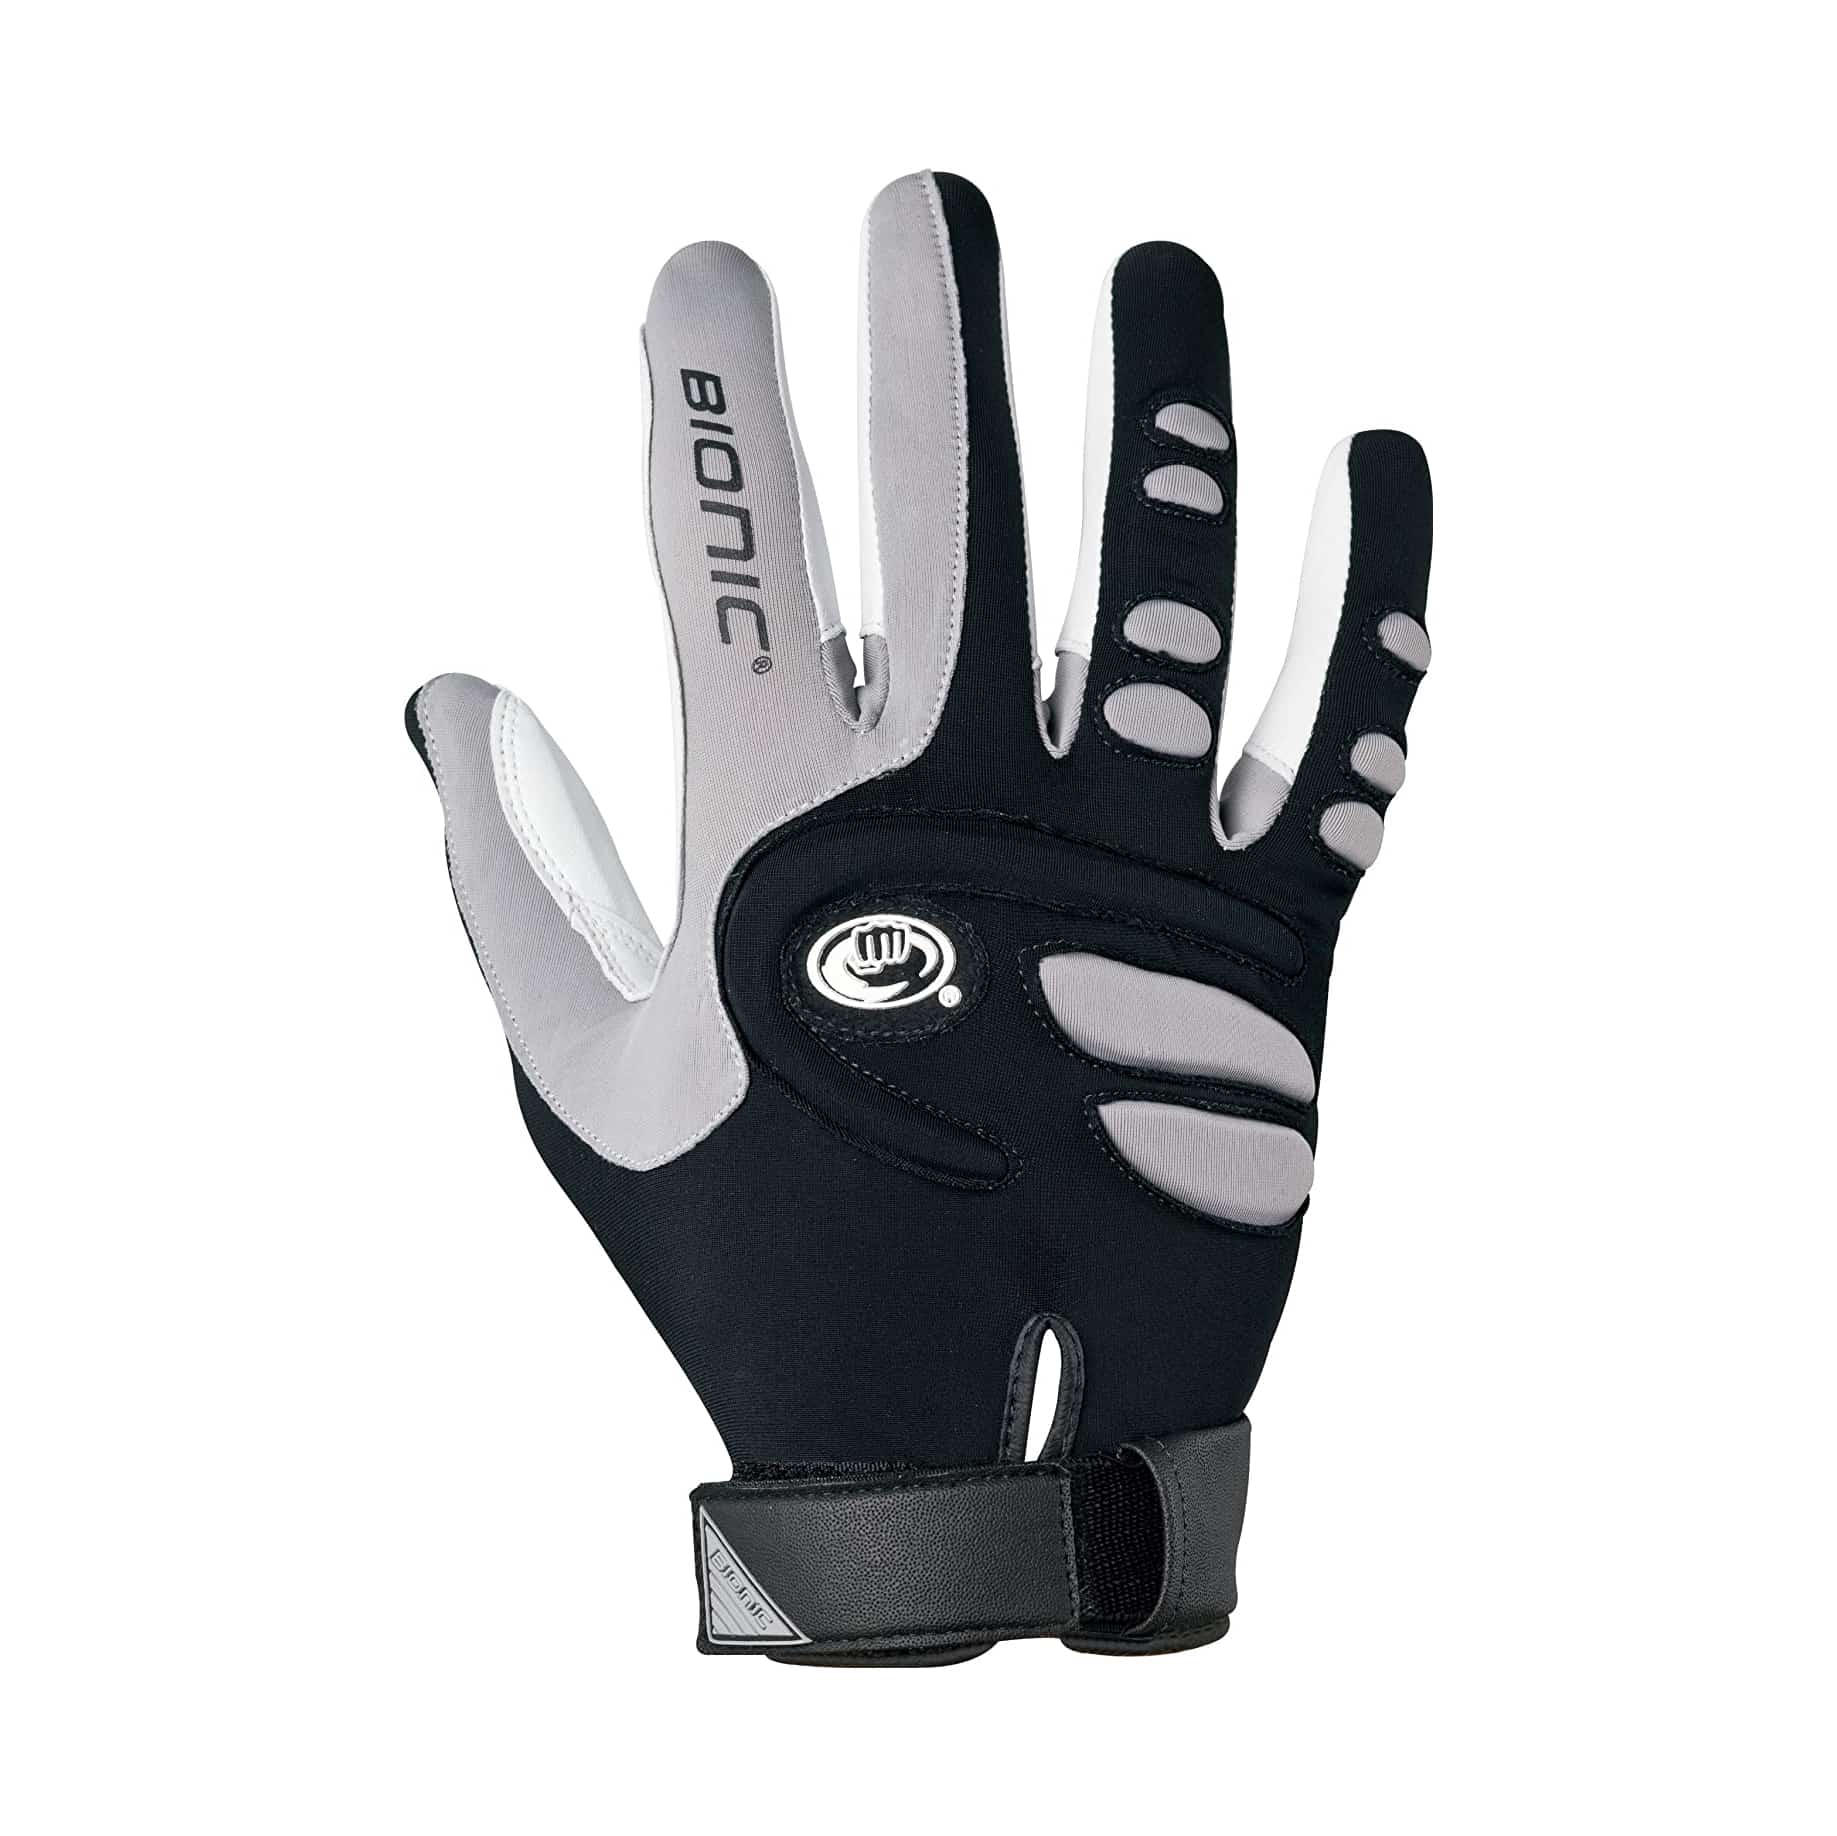 Top 10 Best Tennis Gloves in 2022 Reviews - GoOnProducts